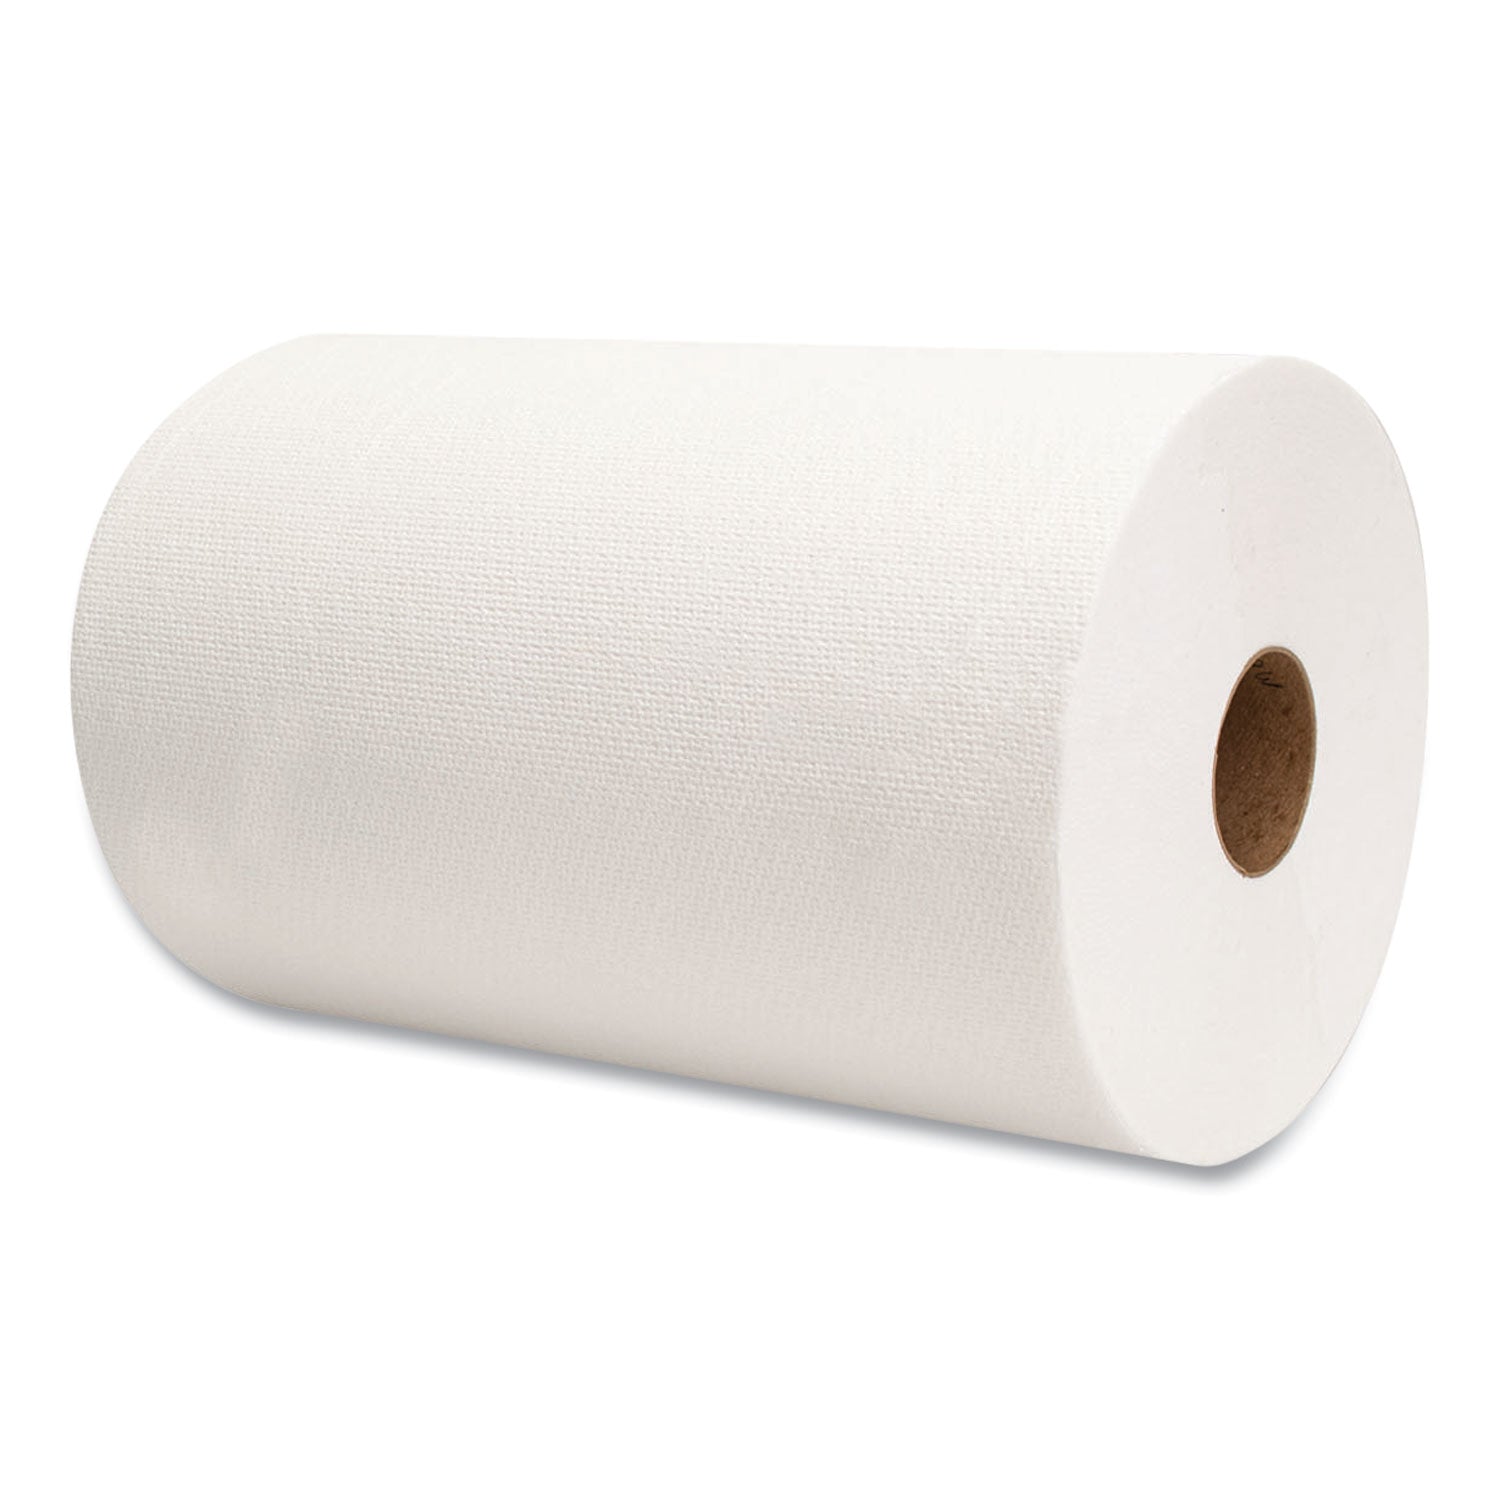 10-inch-tad-roll-towels-1-ply-10-x-500-ft-white-6-rolls-carton_morm610 - 5